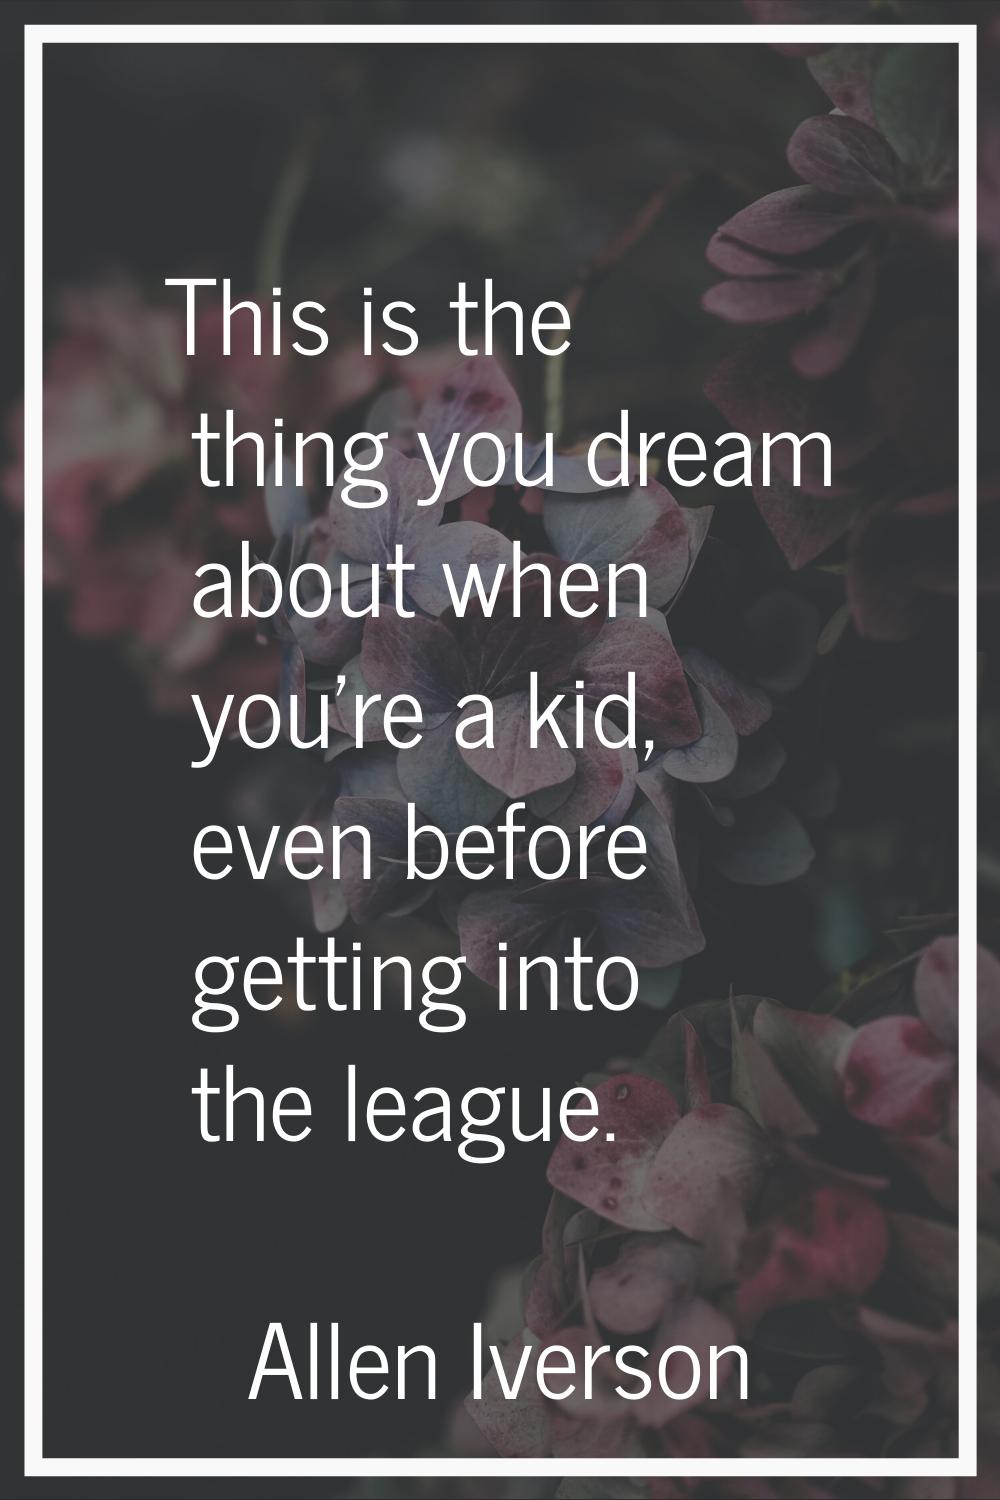 This is the thing you dream about when you're a kid, even before getting into the league.